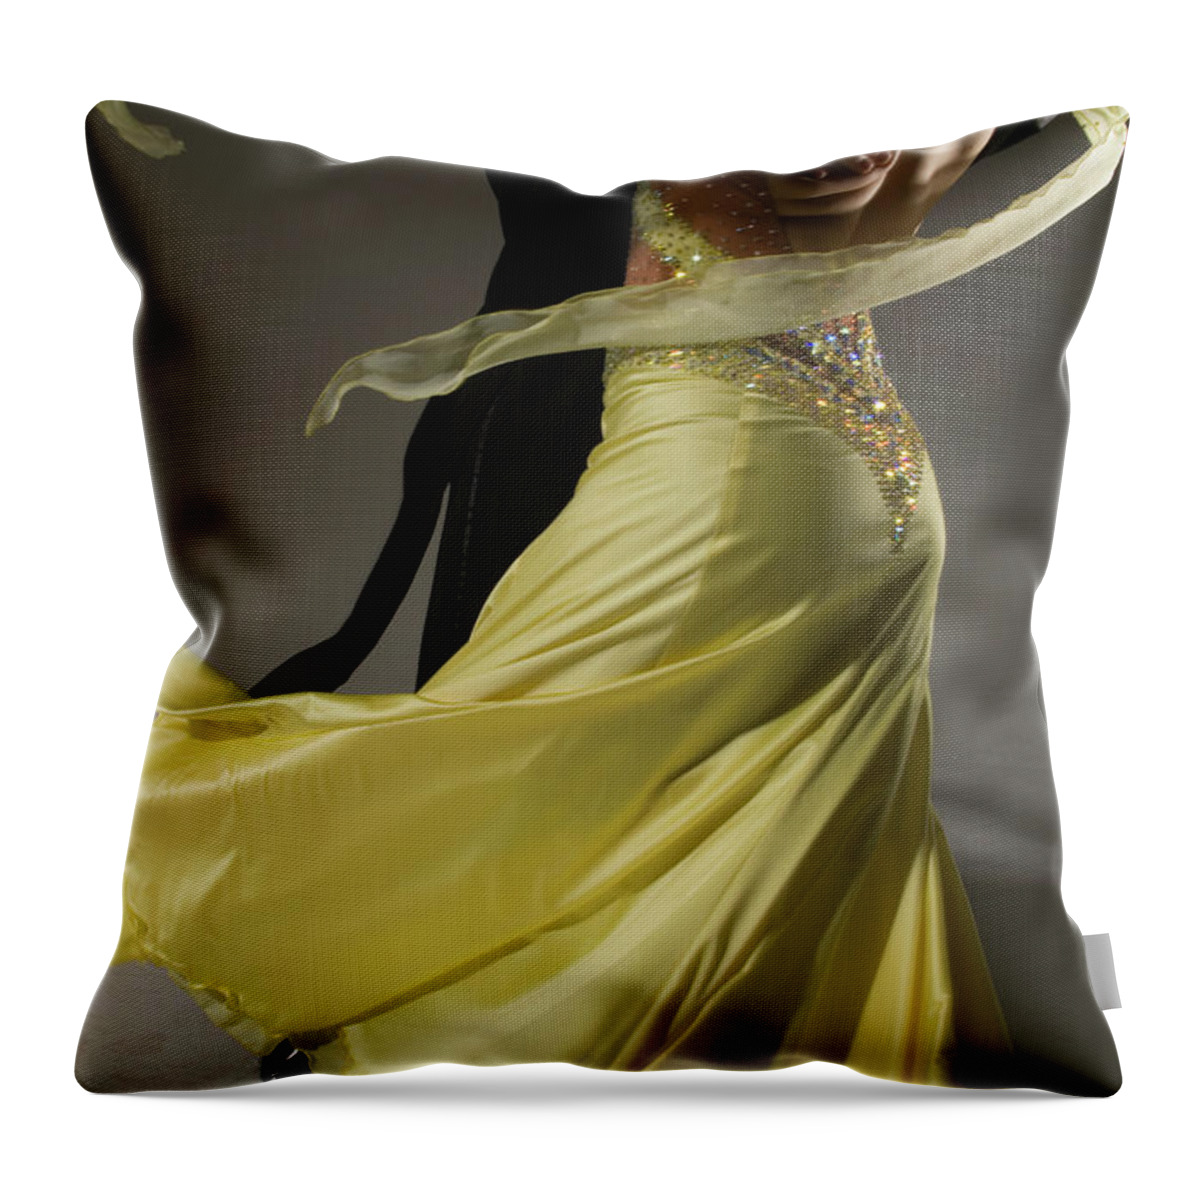 Caucasian Ethnicity Throw Pillow featuring the photograph Man And Woman Ballroom Dancing, Low by Pm Images